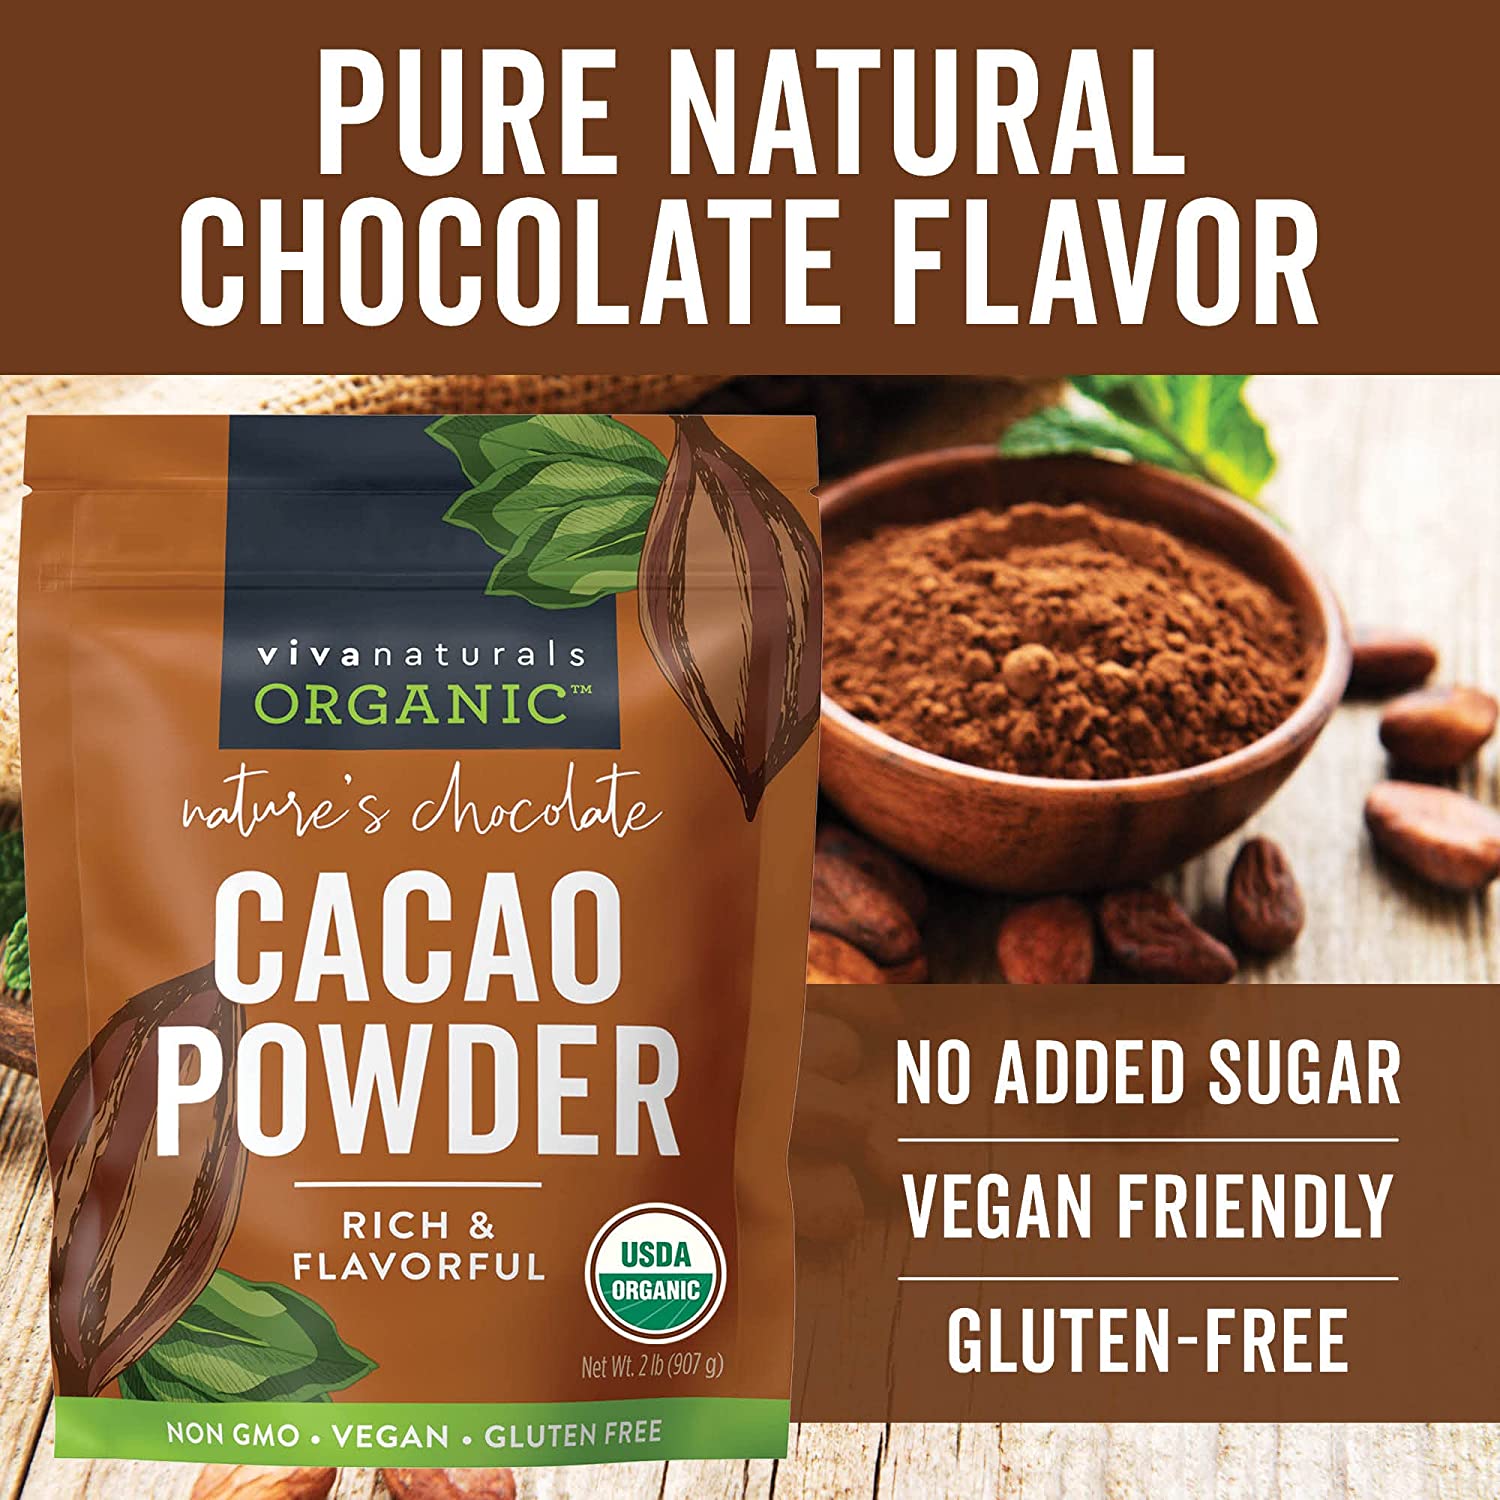 Organic Cacao Powder, 2lb - Unsweetened Cocoa Powder With Rich Dark Chocolate Flavor, Perfect for Baking & Smoothies, Non-GMO, Certified Vegan & Gluten-Free, 907 g